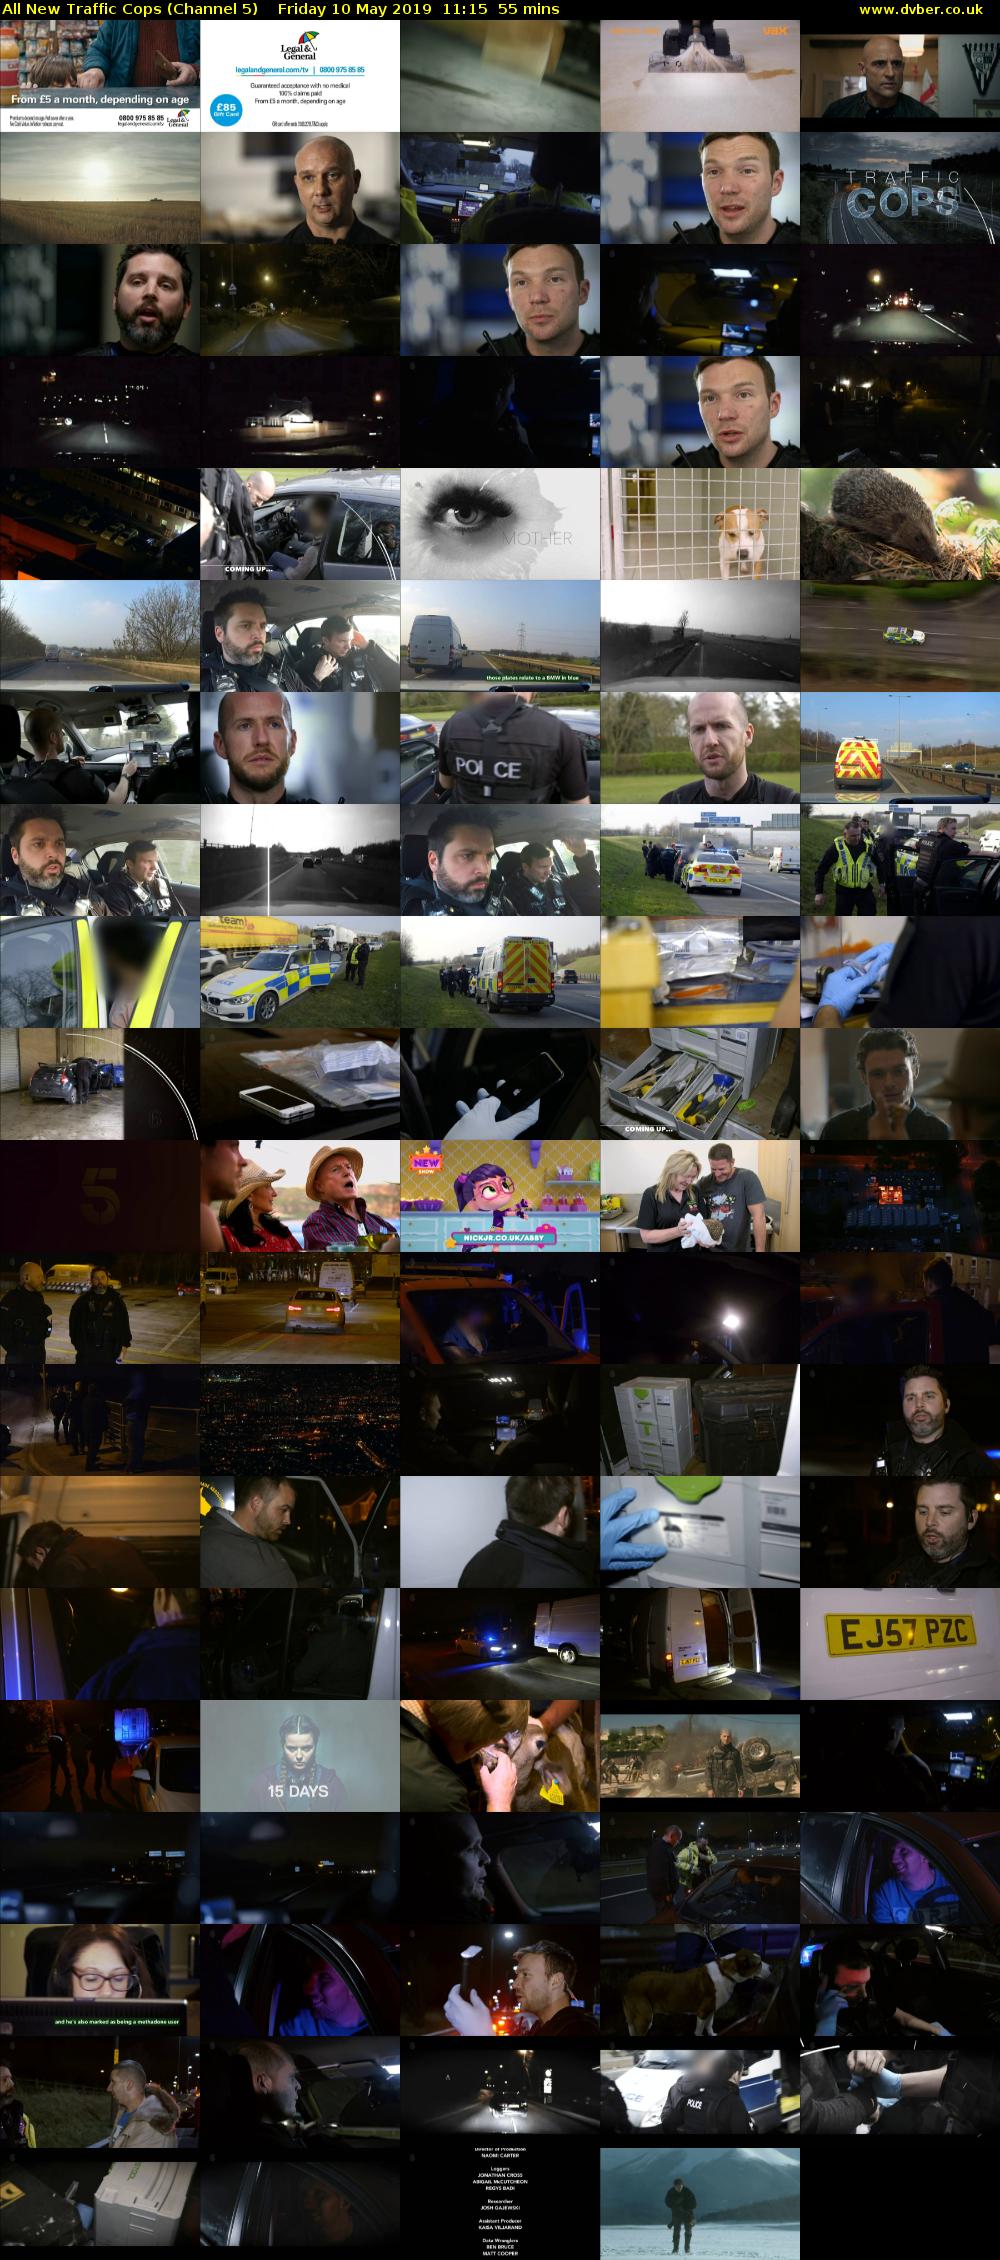 All New Traffic Cops (Channel 5) Friday 10 May 2019 11:15 - 12:10